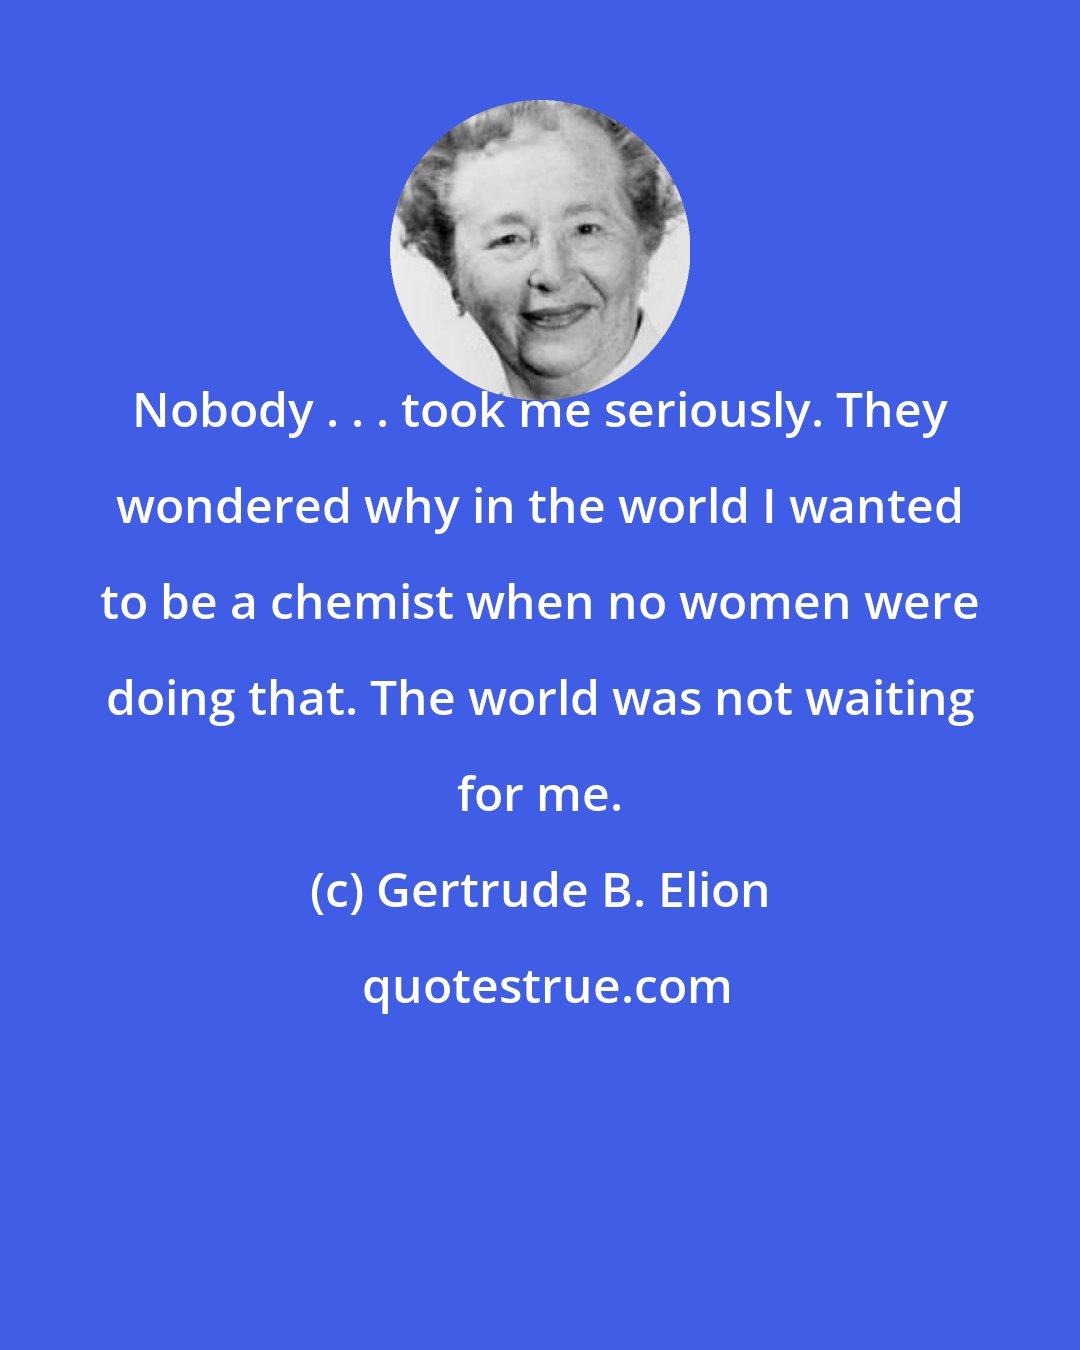 Gertrude B. Elion: Nobody . . . took me seriously. They wondered why in the world I wanted to be a chemist when no women were doing that. The world was not waiting for me.